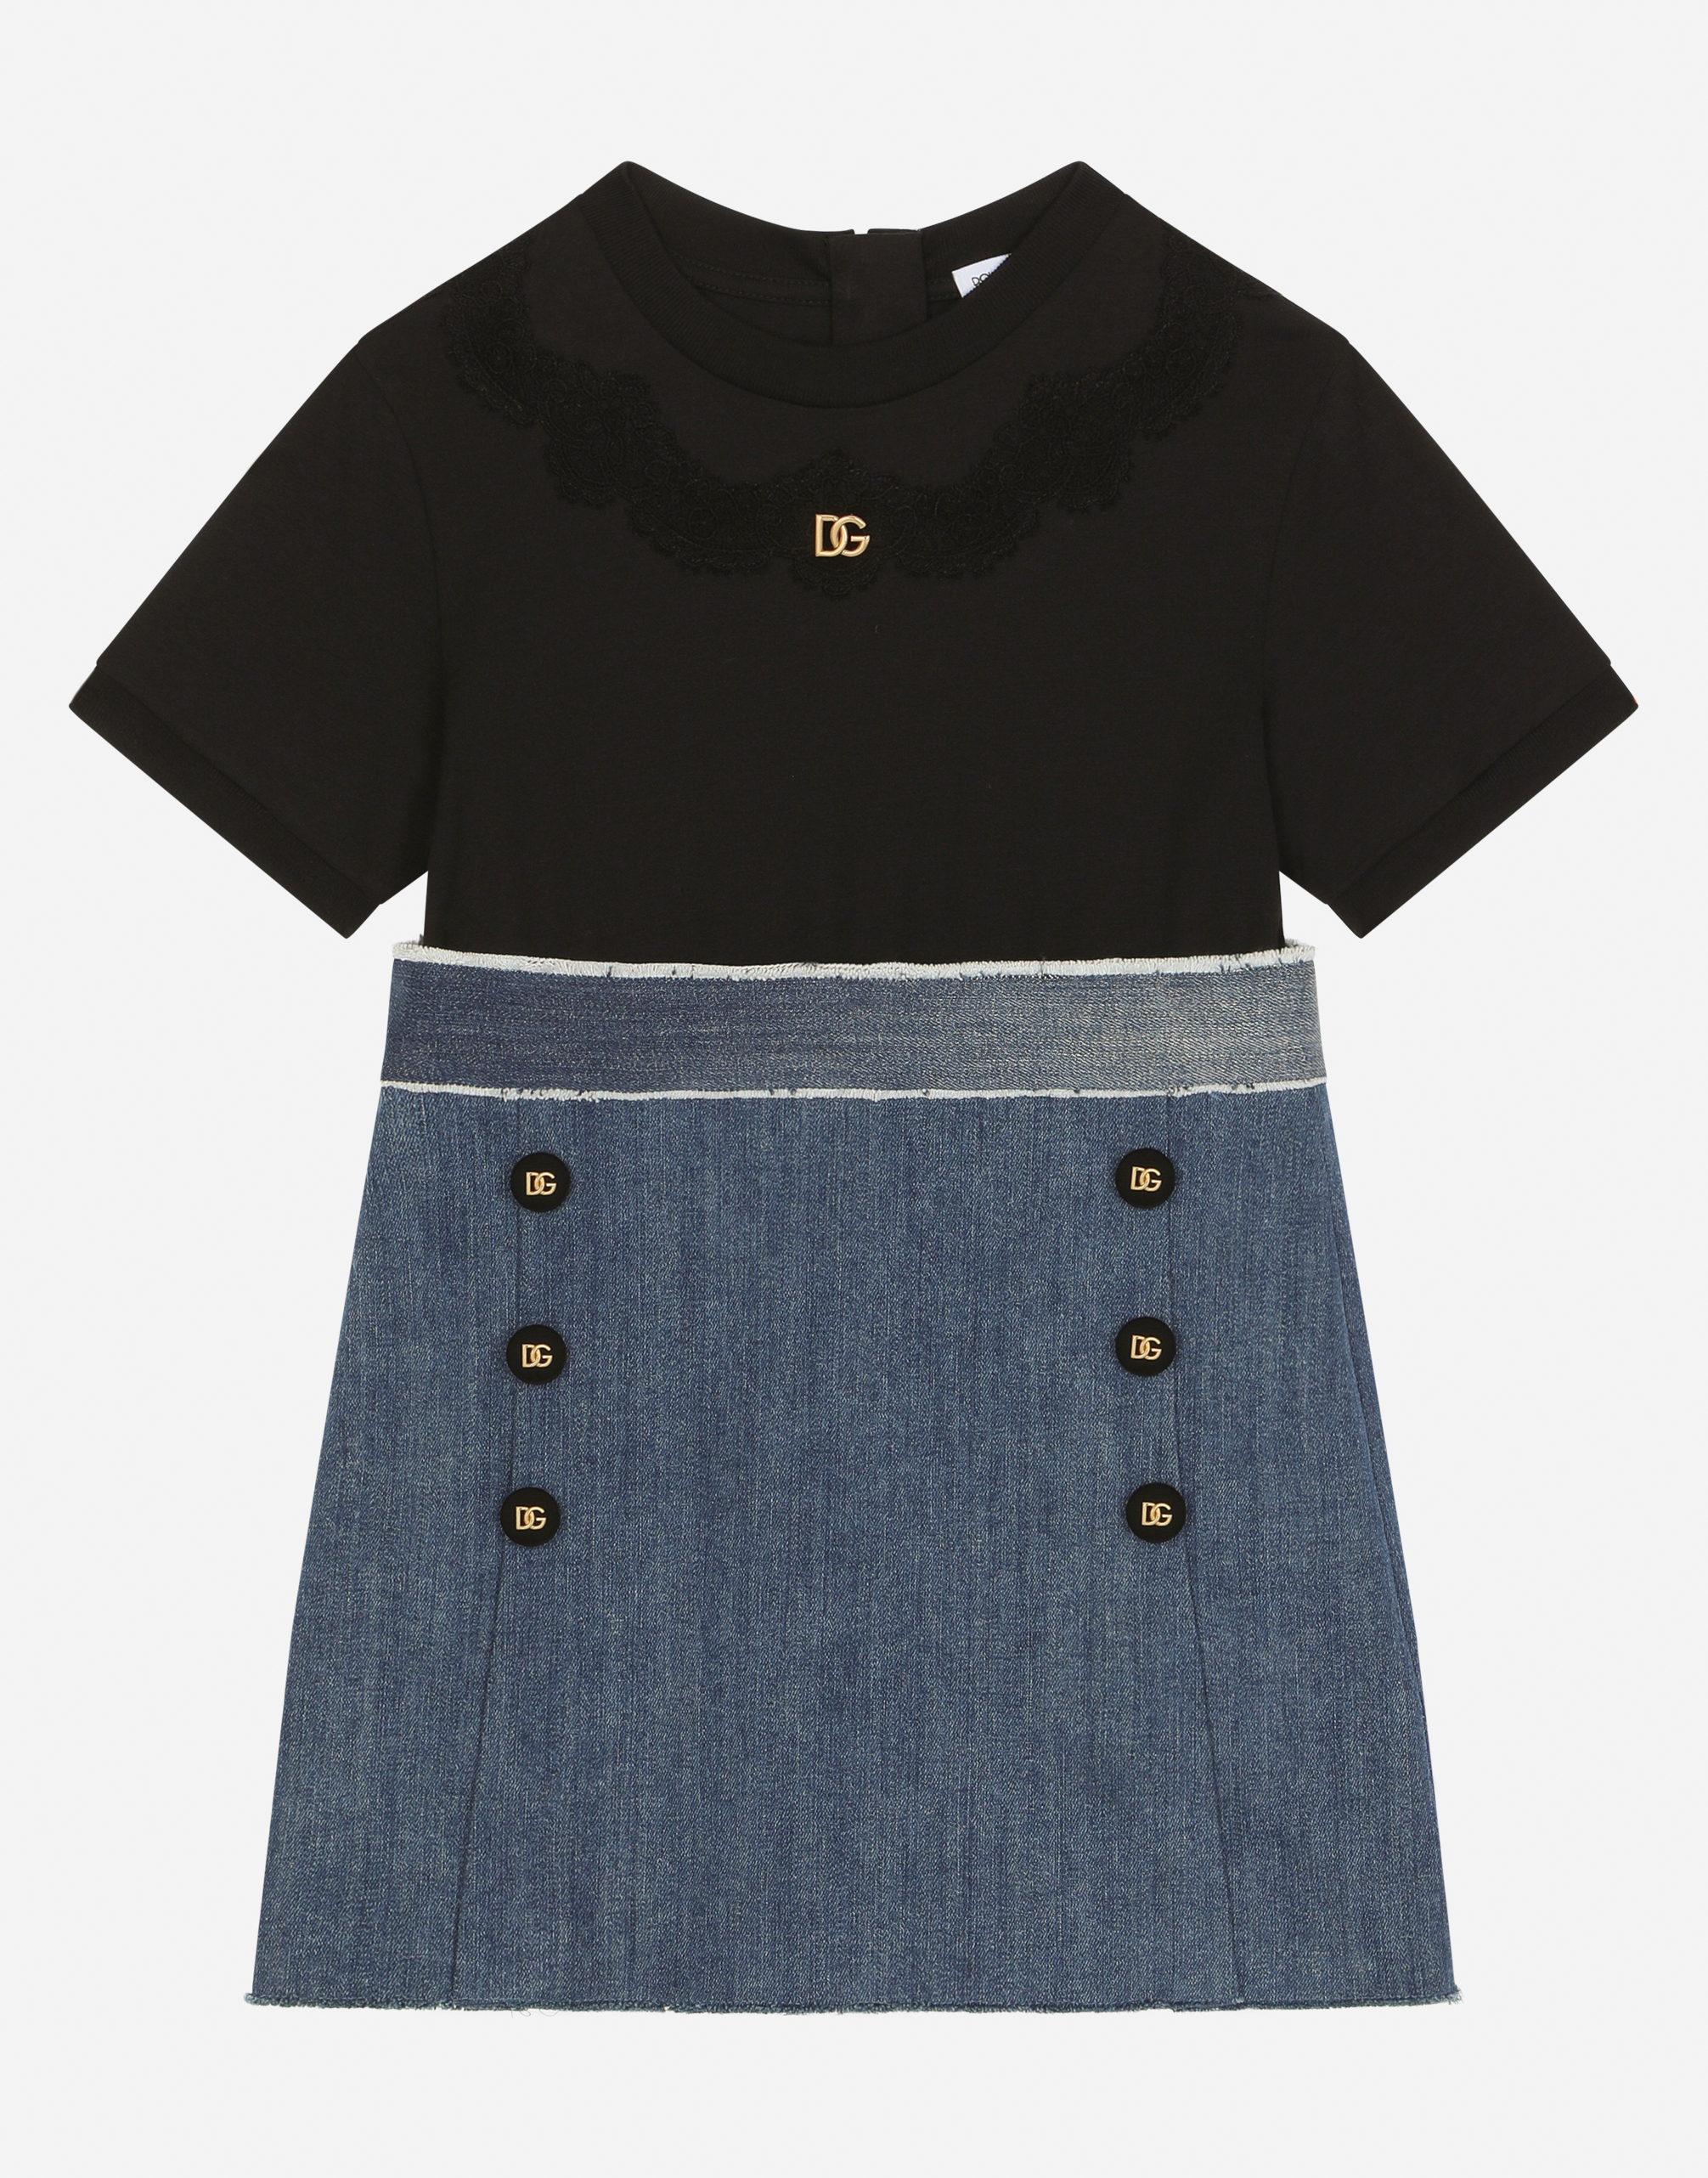 Dolce & Gabbana Kids' Stretch Denim And Jersey Dress With Dg Logo In Multicolor